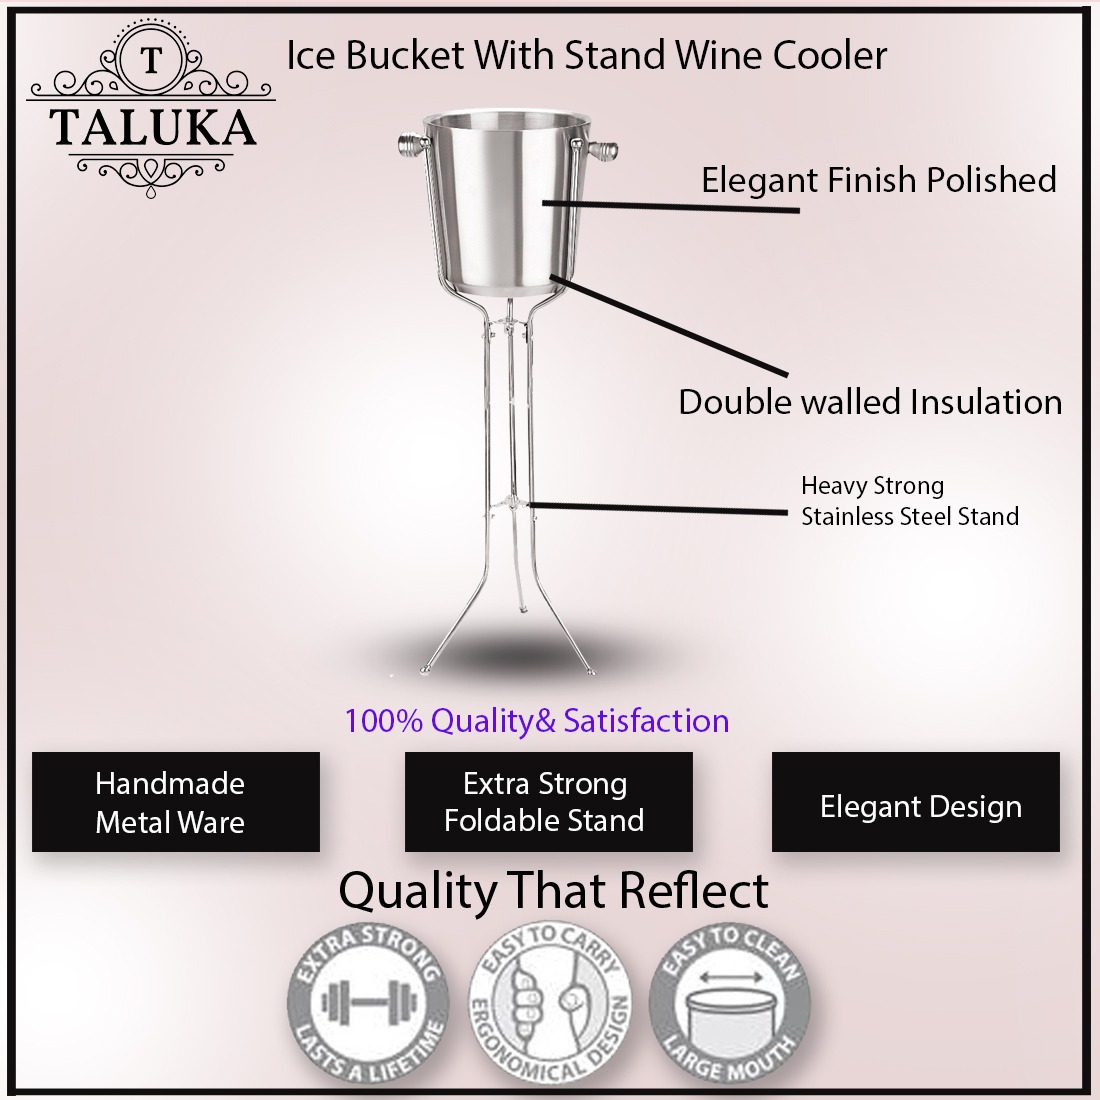 (11" X 24" Inches Approx) Handmade Royal Ethnic Stainless Steel Champagne Bucket / Ice Bucket With Stand Wine Cooler